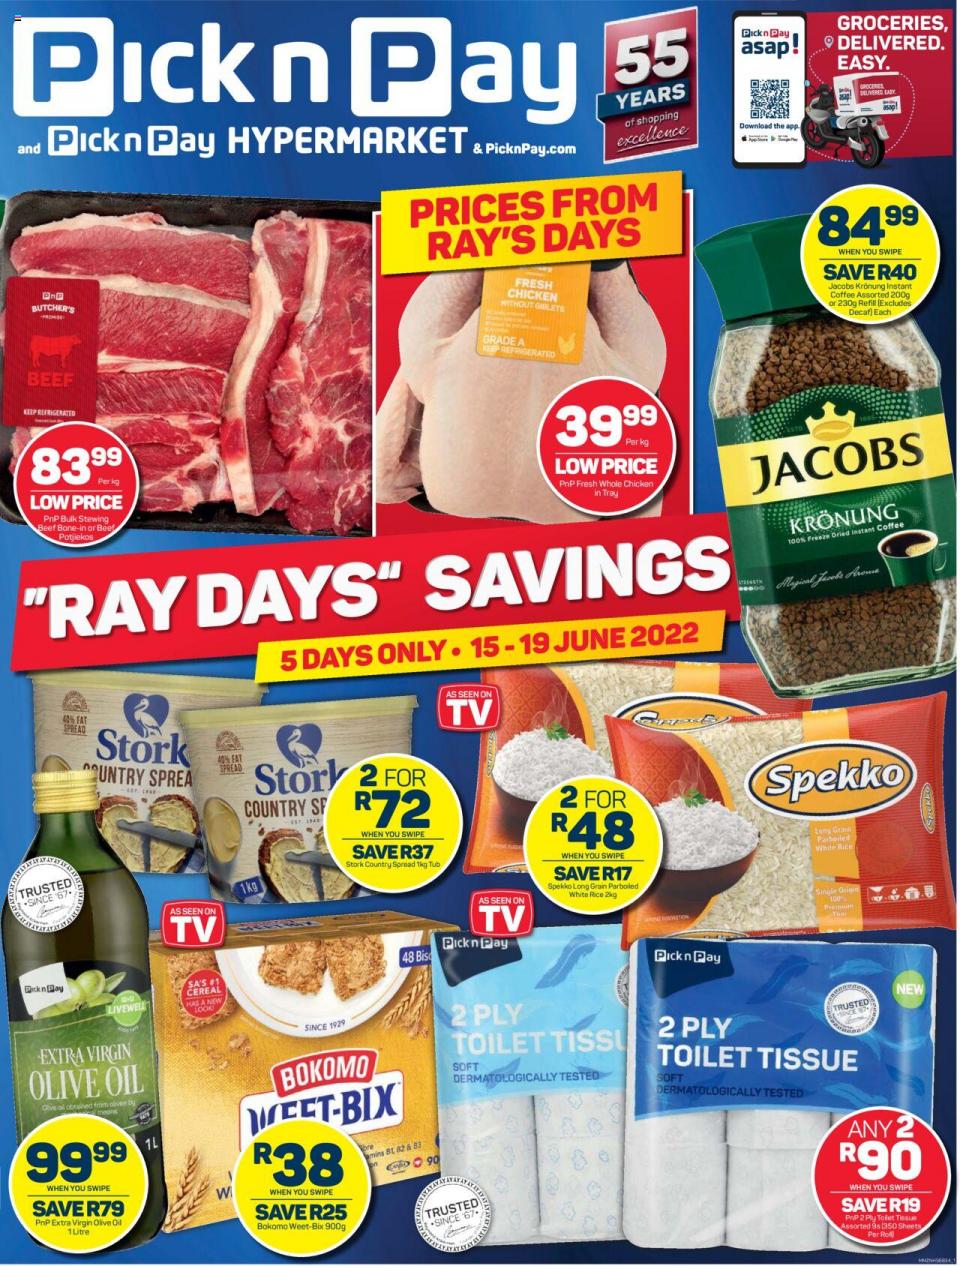 Pick n Pay Specials Ray Day Savings 15 – 19 June 2022